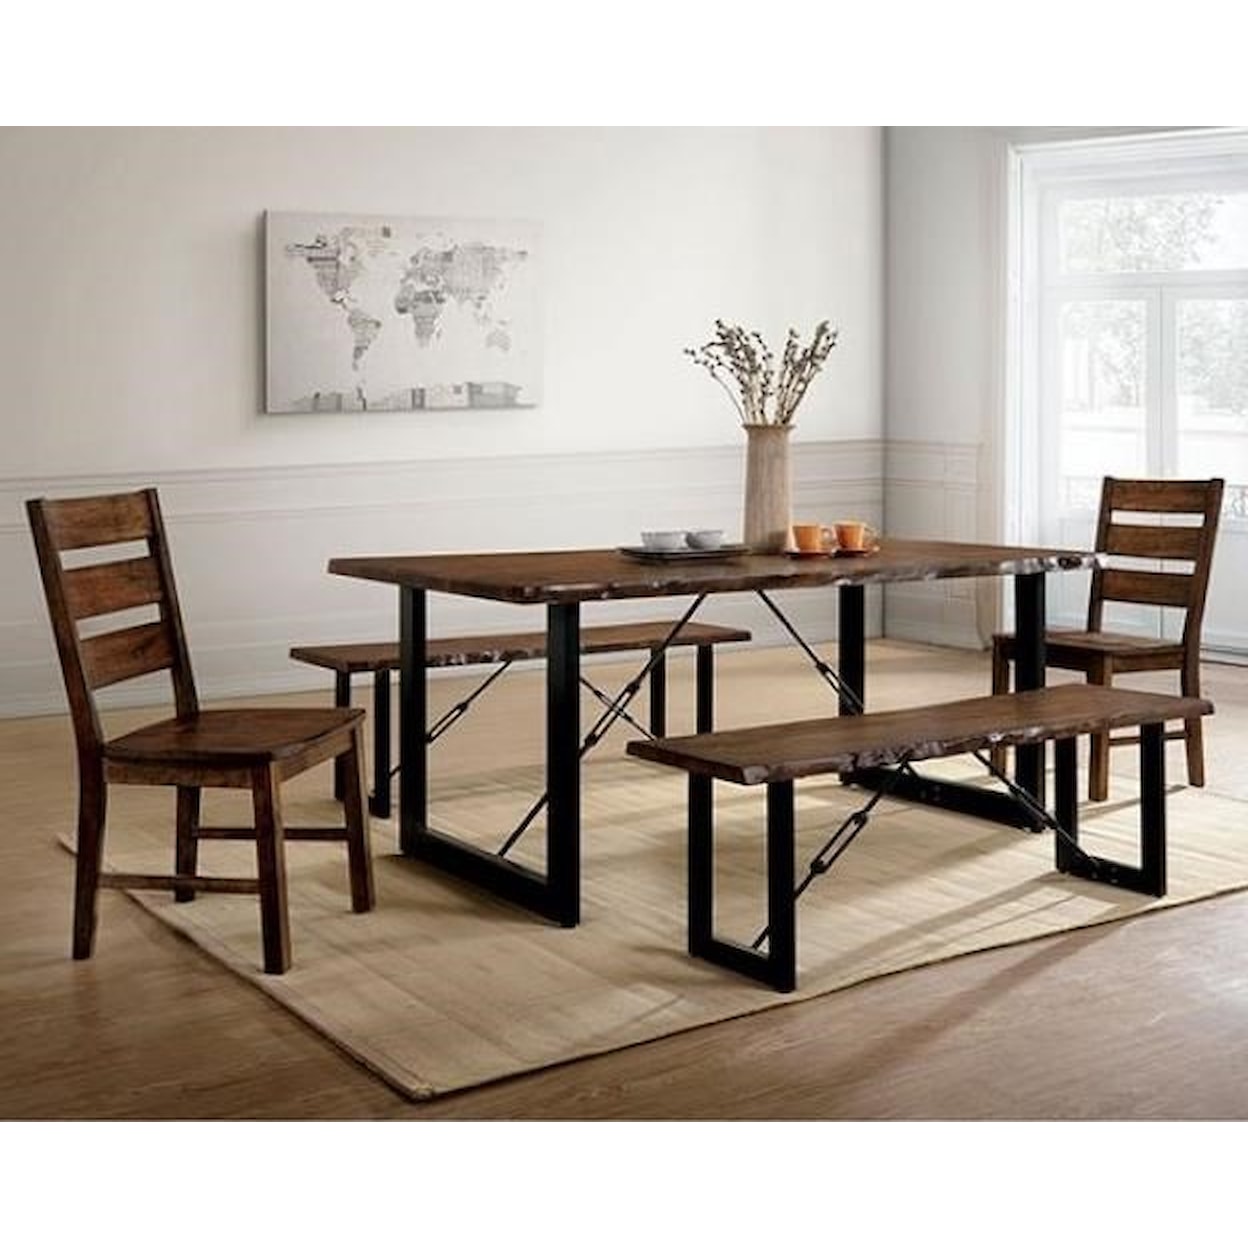 FUSA Dulce Table and Chair Set with Bench